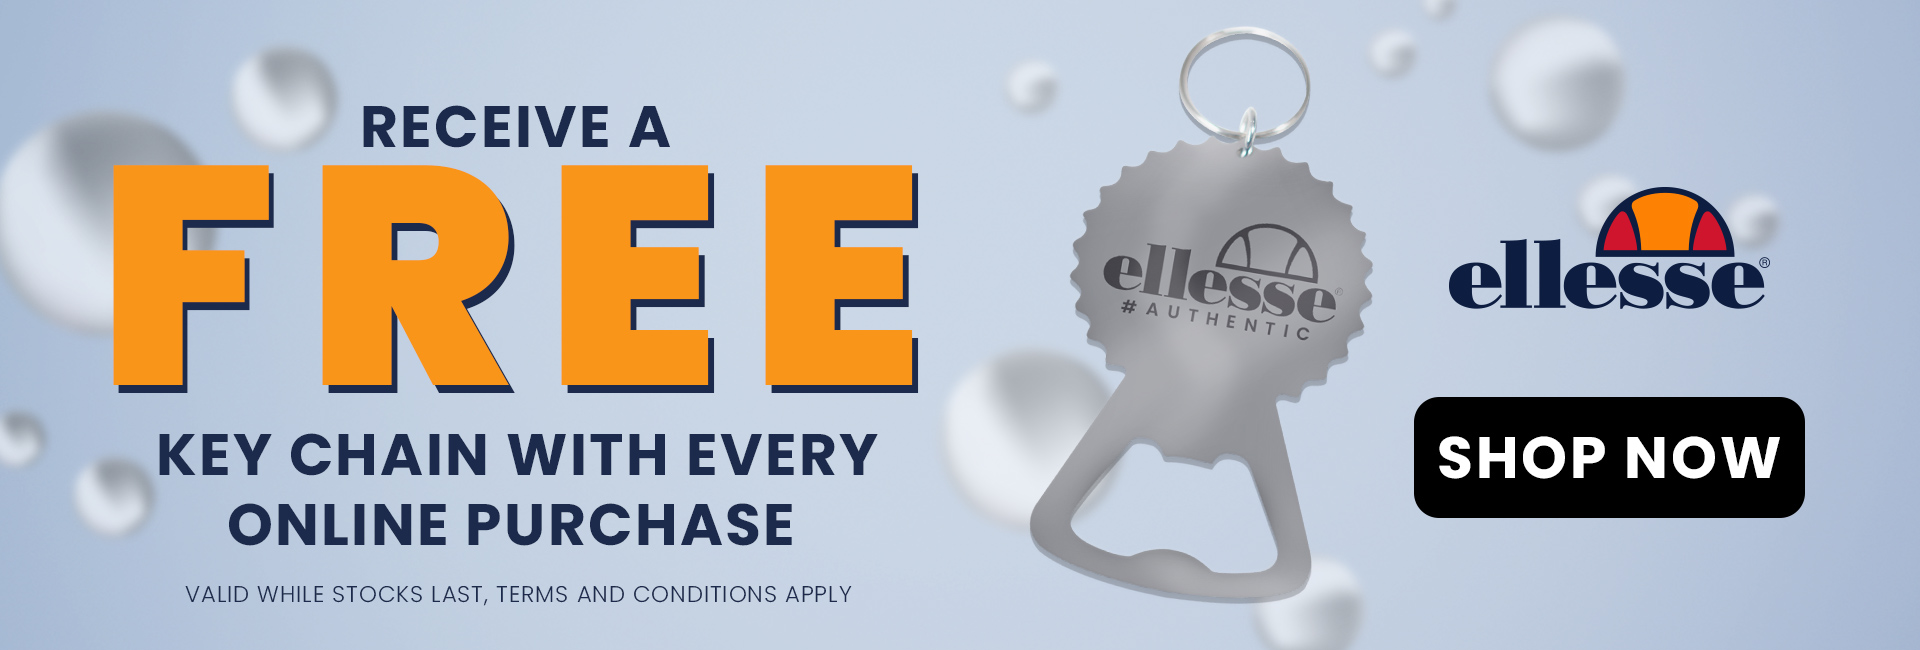 MFree Keychain Promo - Get a keychain with every online purchase at ellesse.co.za (while supplies last)